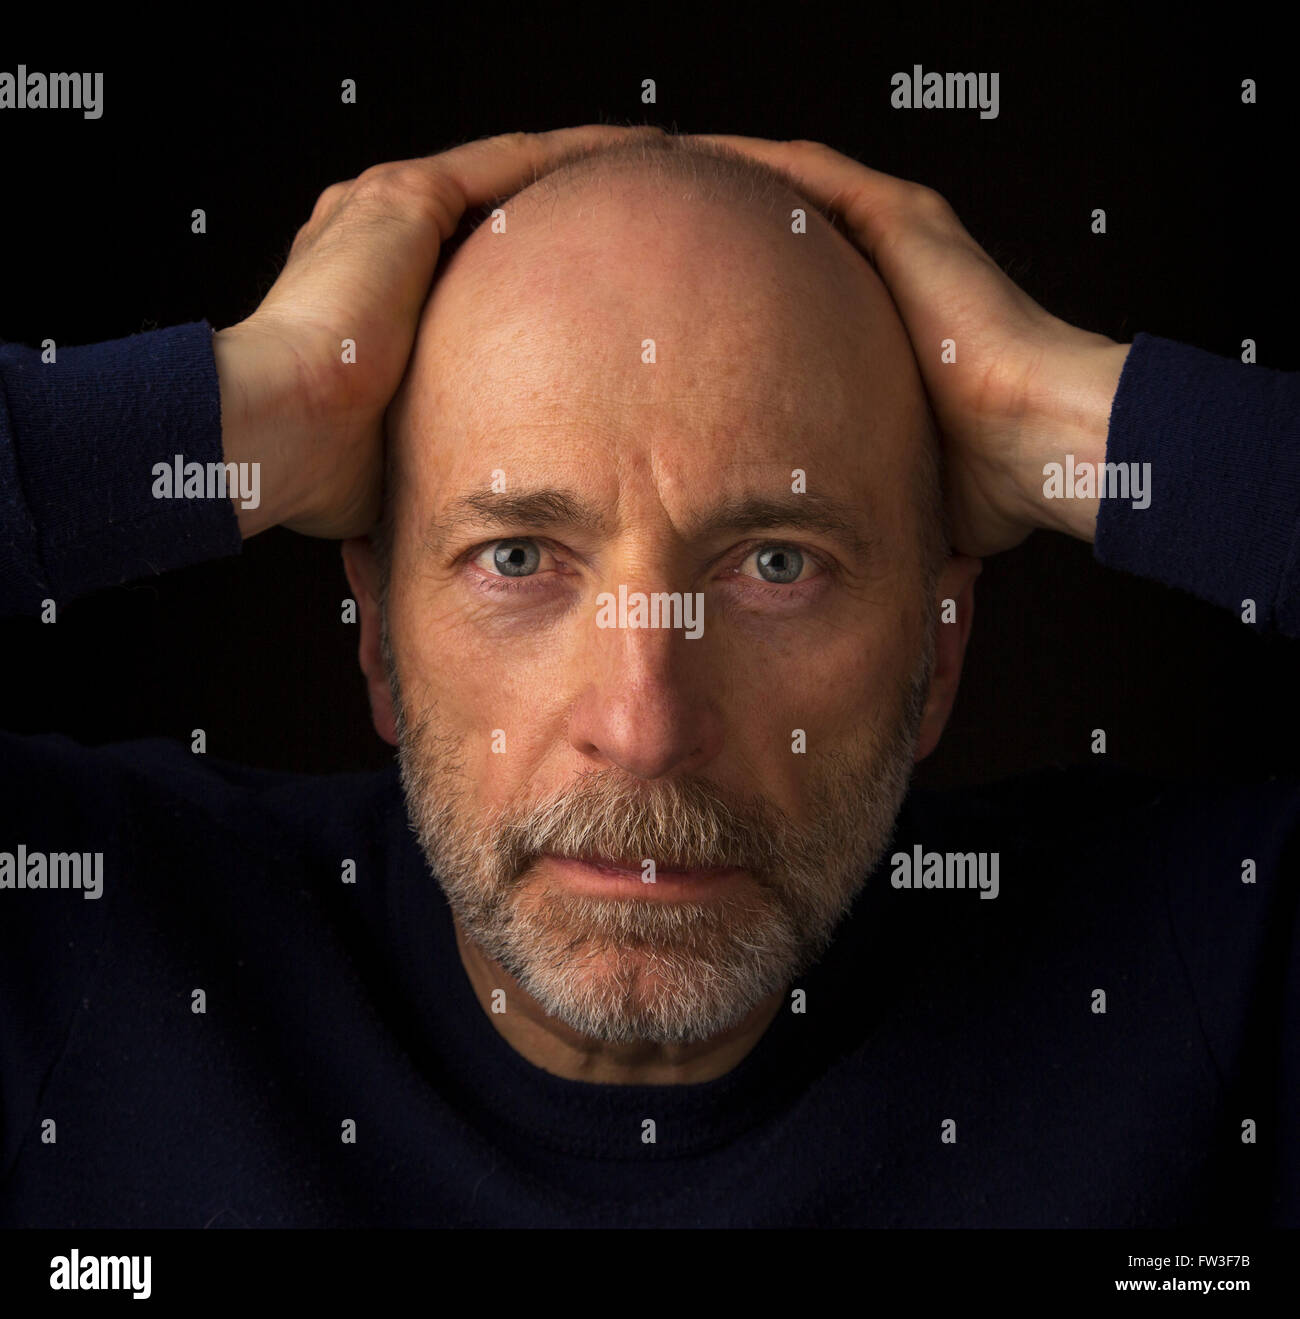 60 years old  bald man with a beard - a head shot against a black background Stock Photo